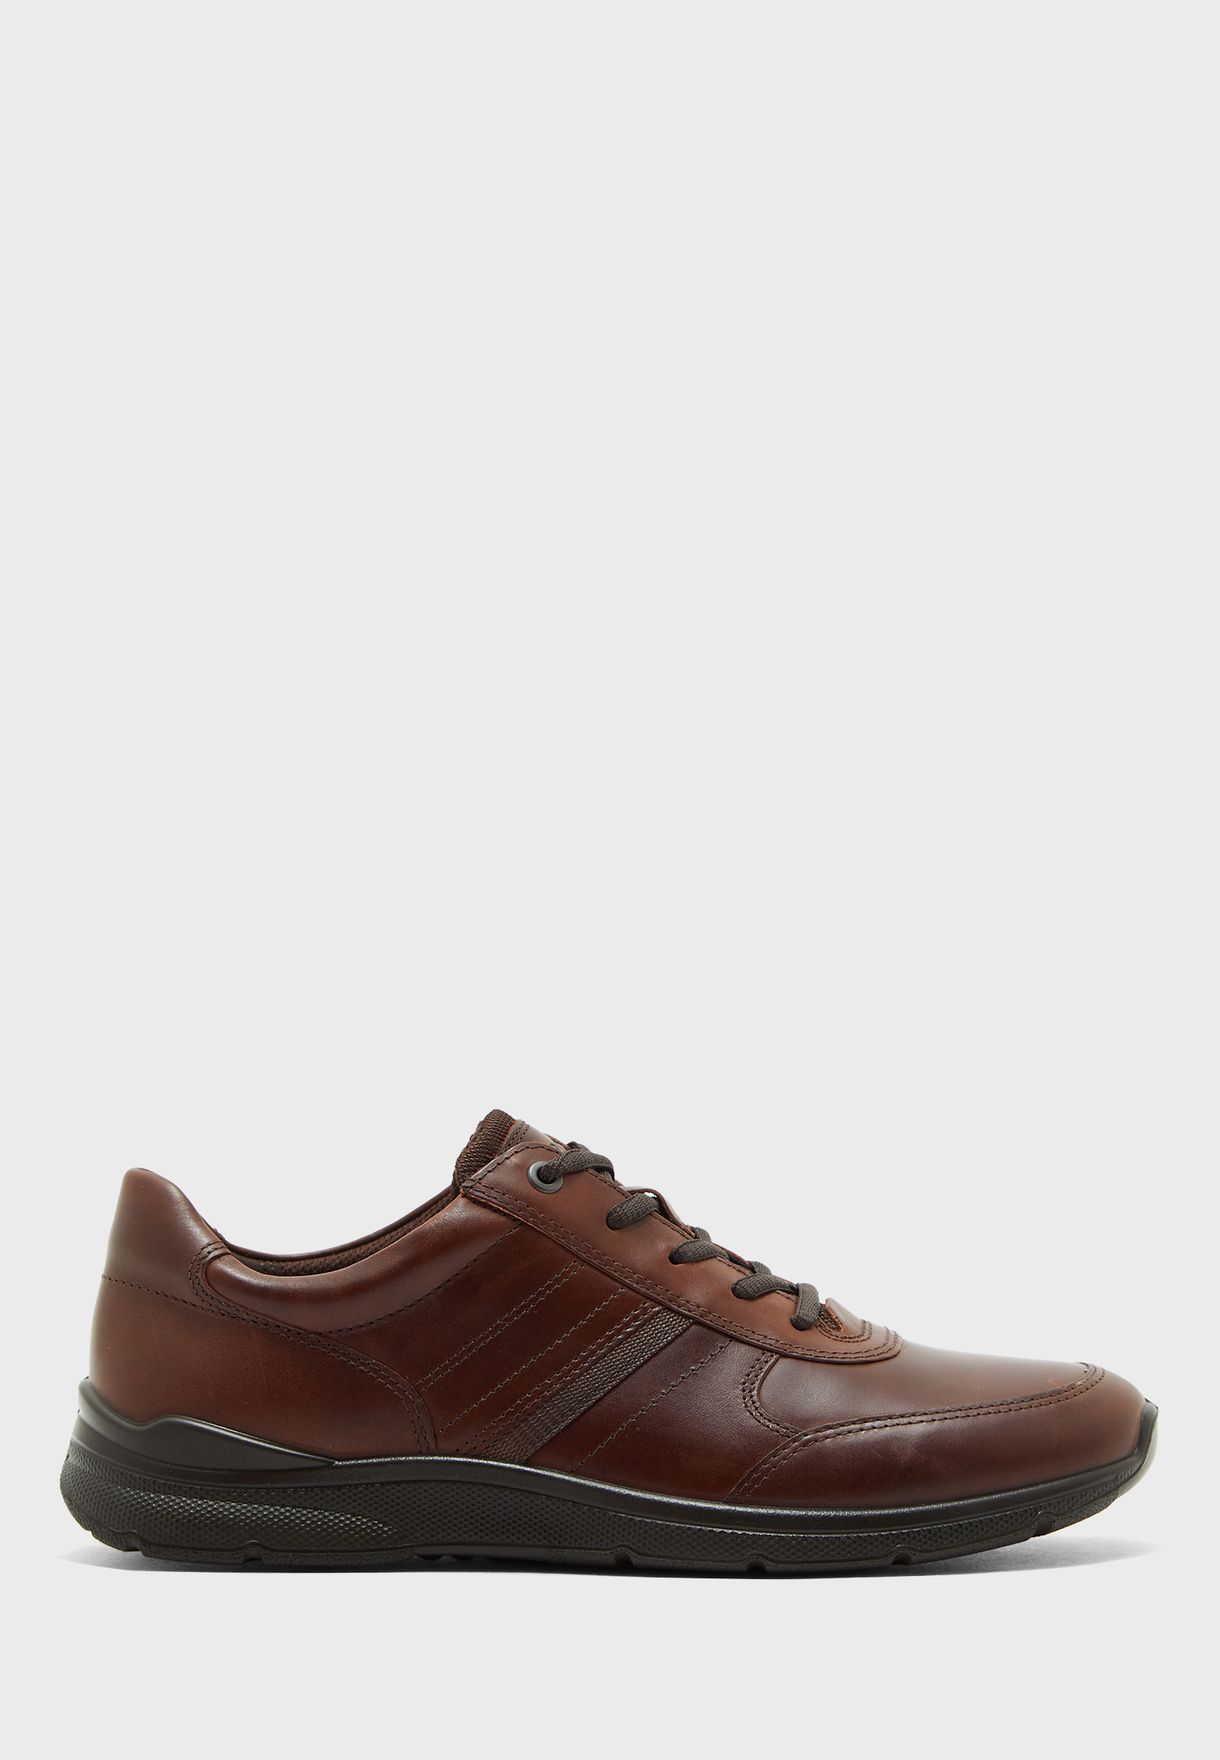 ecco brown leather sneakers